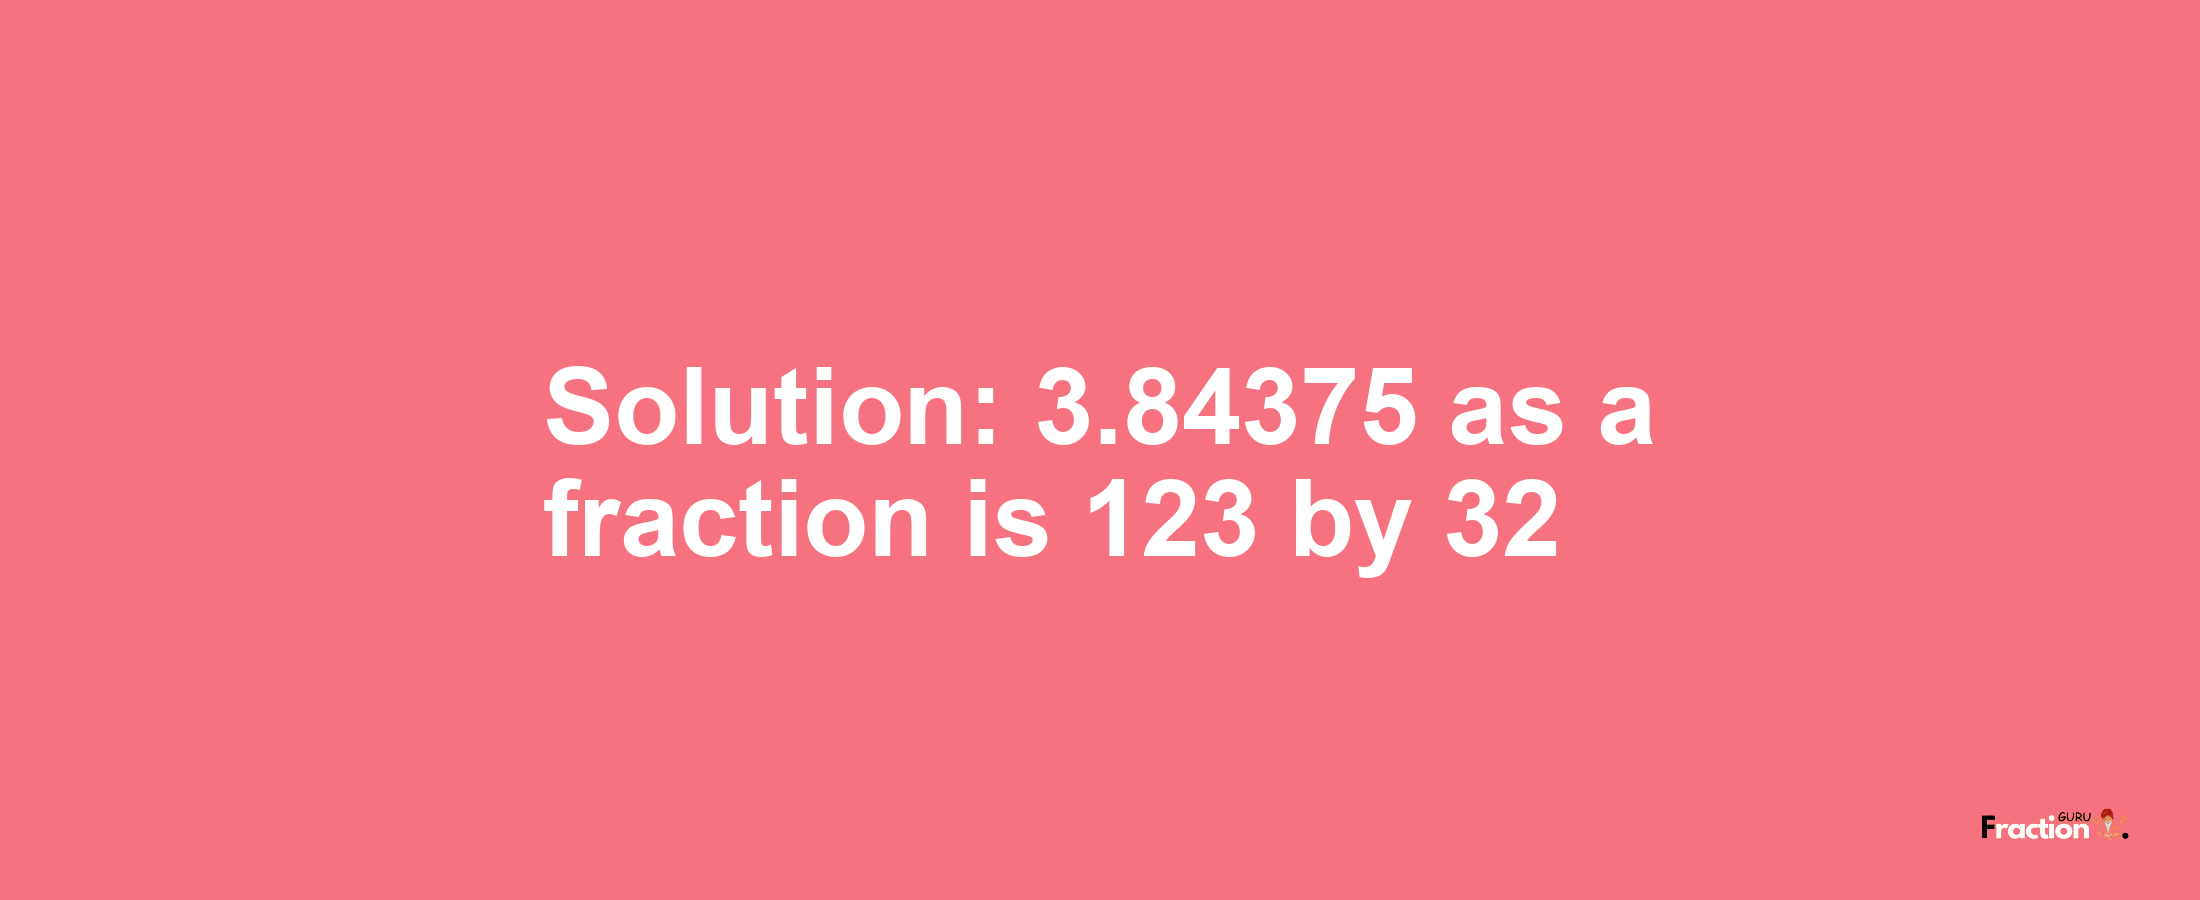 Solution:3.84375 as a fraction is 123/32